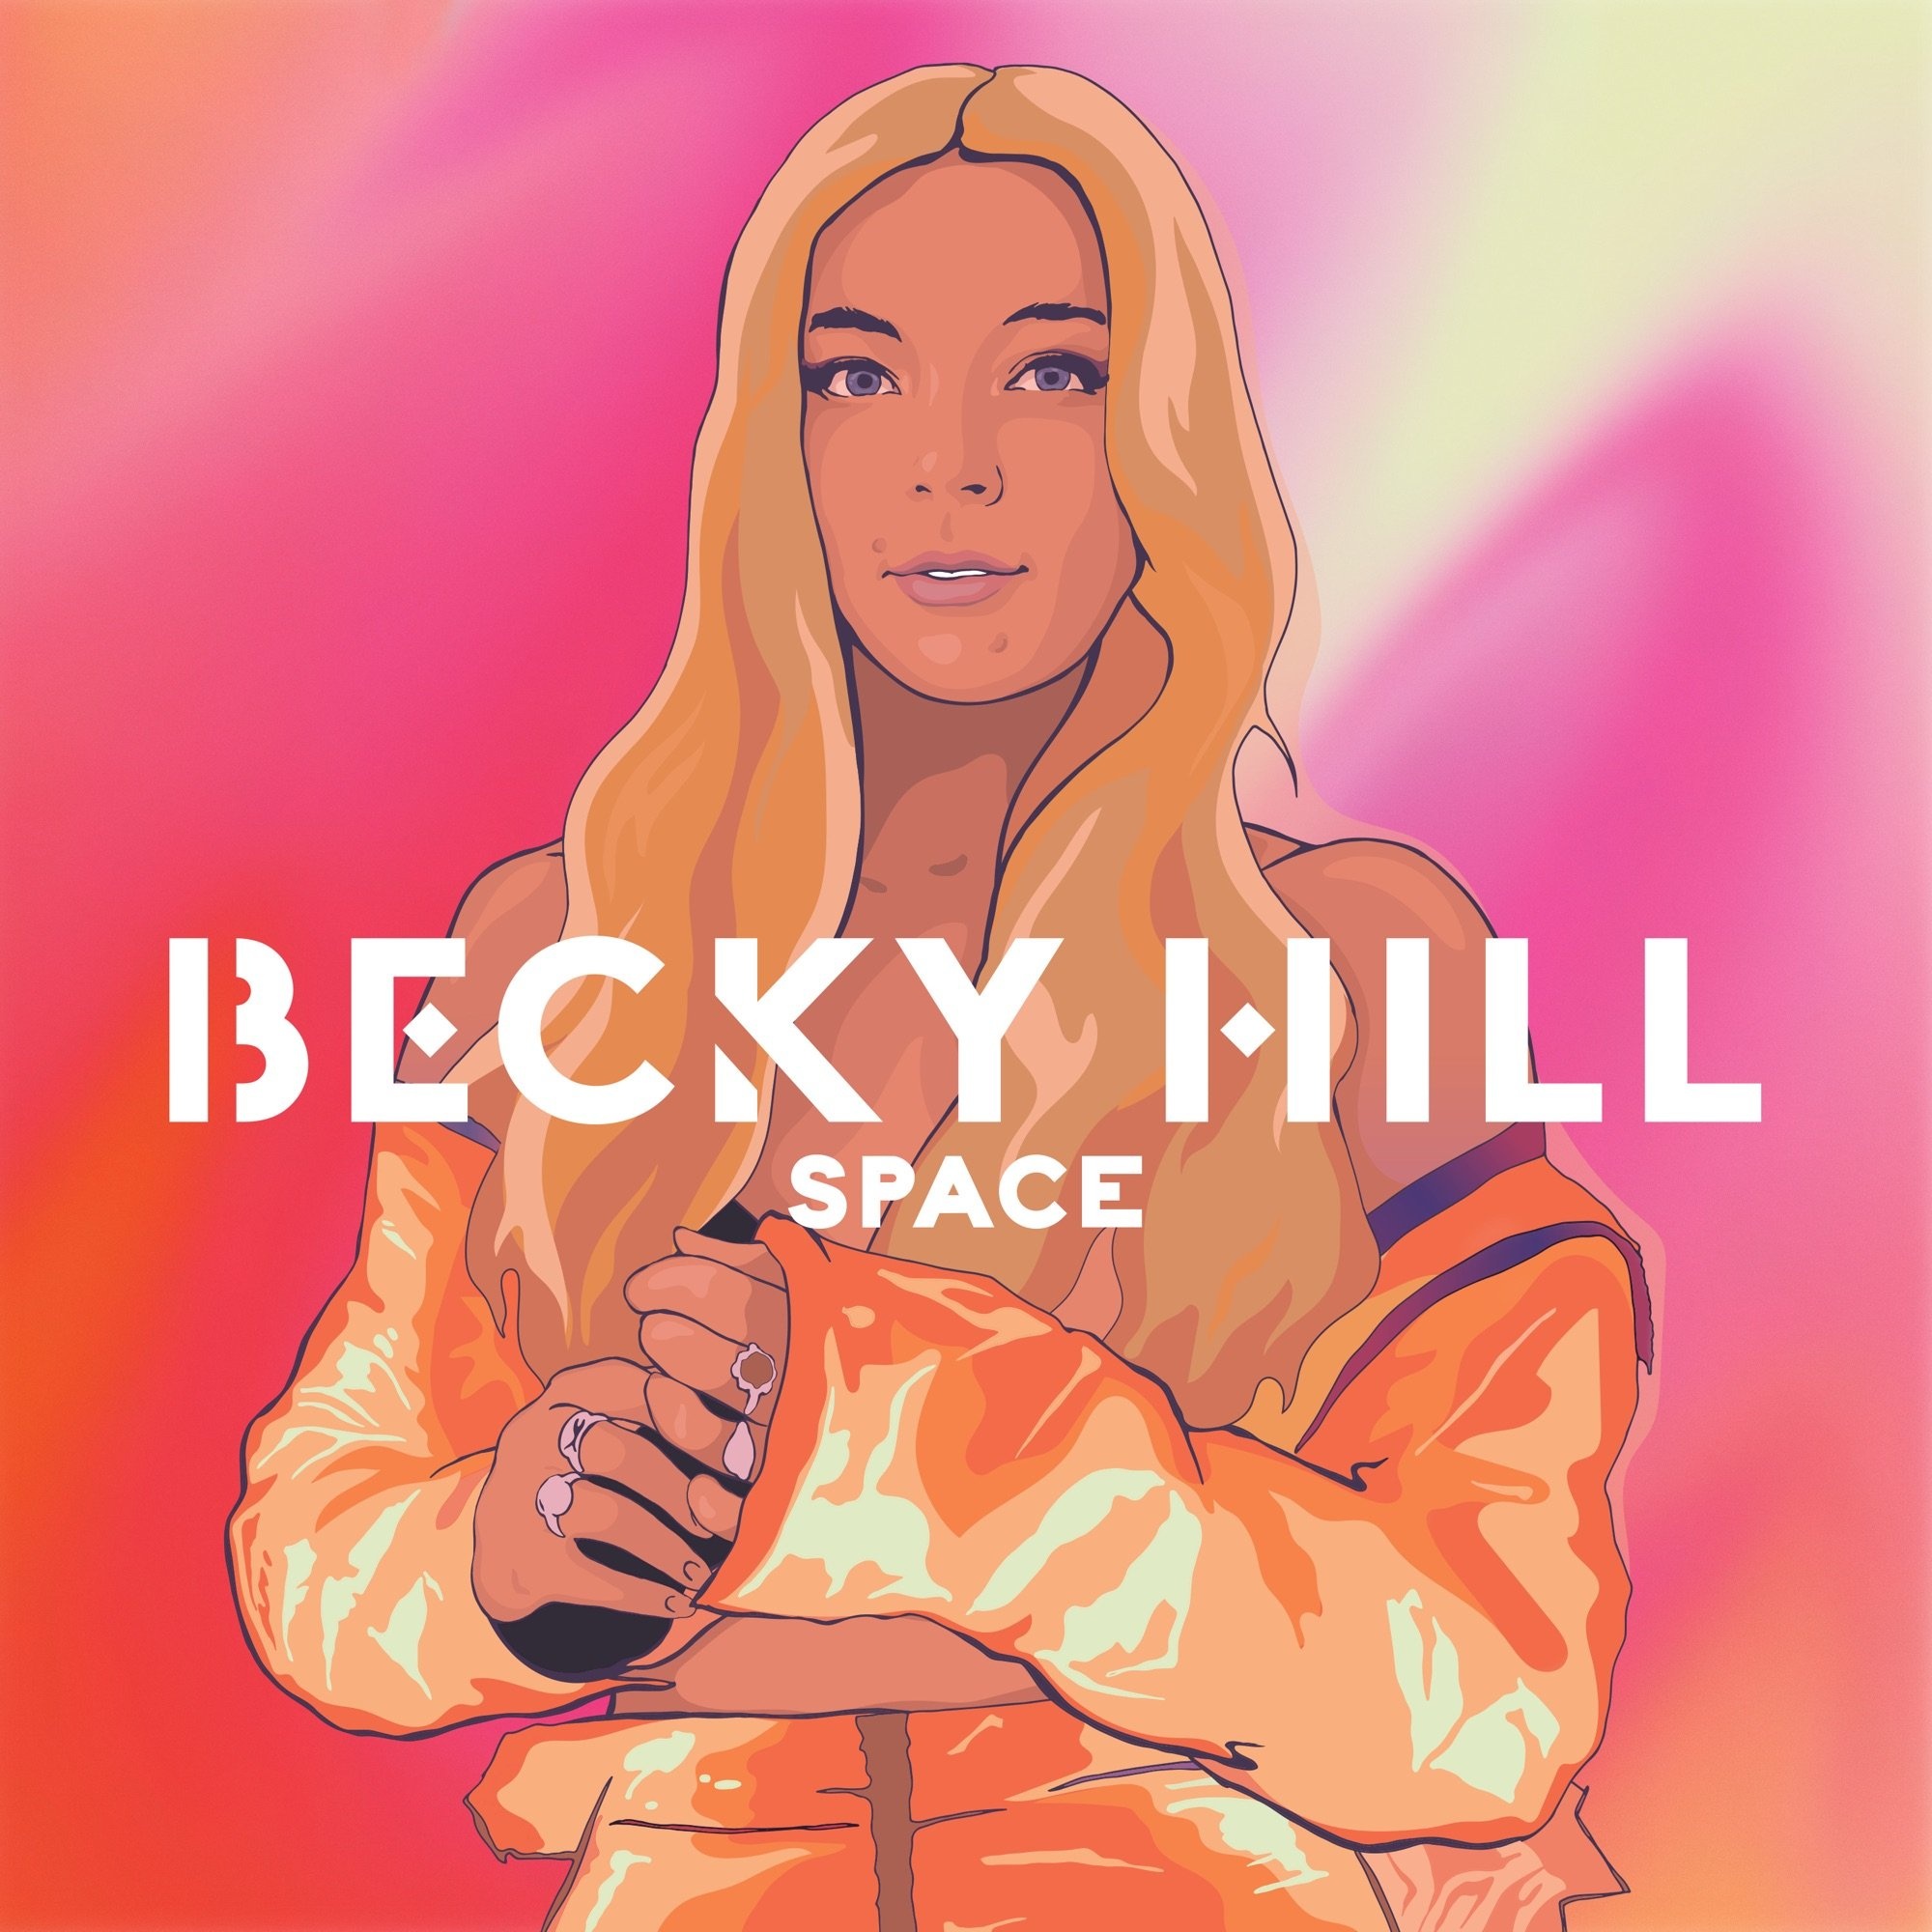 Becky Hill, Space-themed, Last. fm profile, Music exploration, 2000x2000 HD Handy